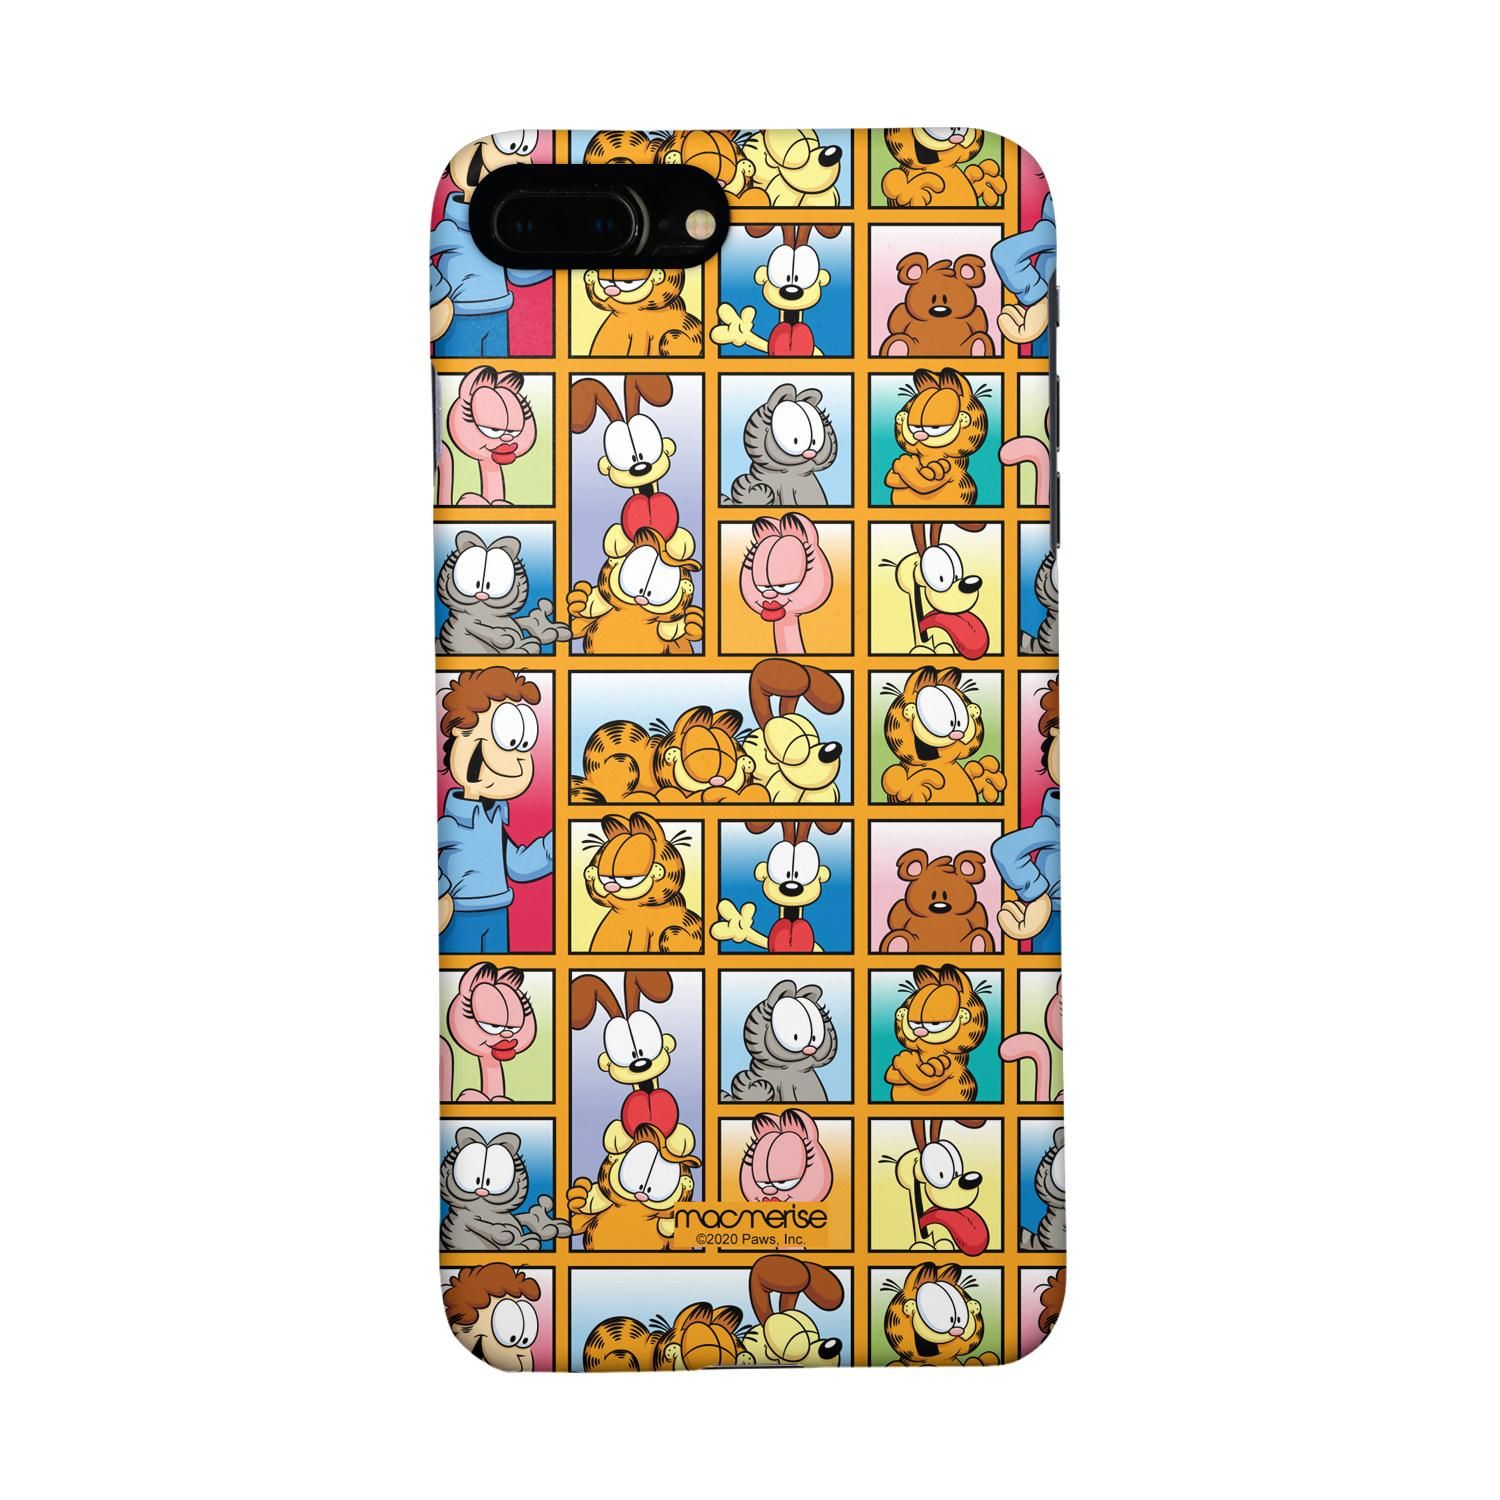 Garfield Collage - Sleek Case for iPhone 7 Plus